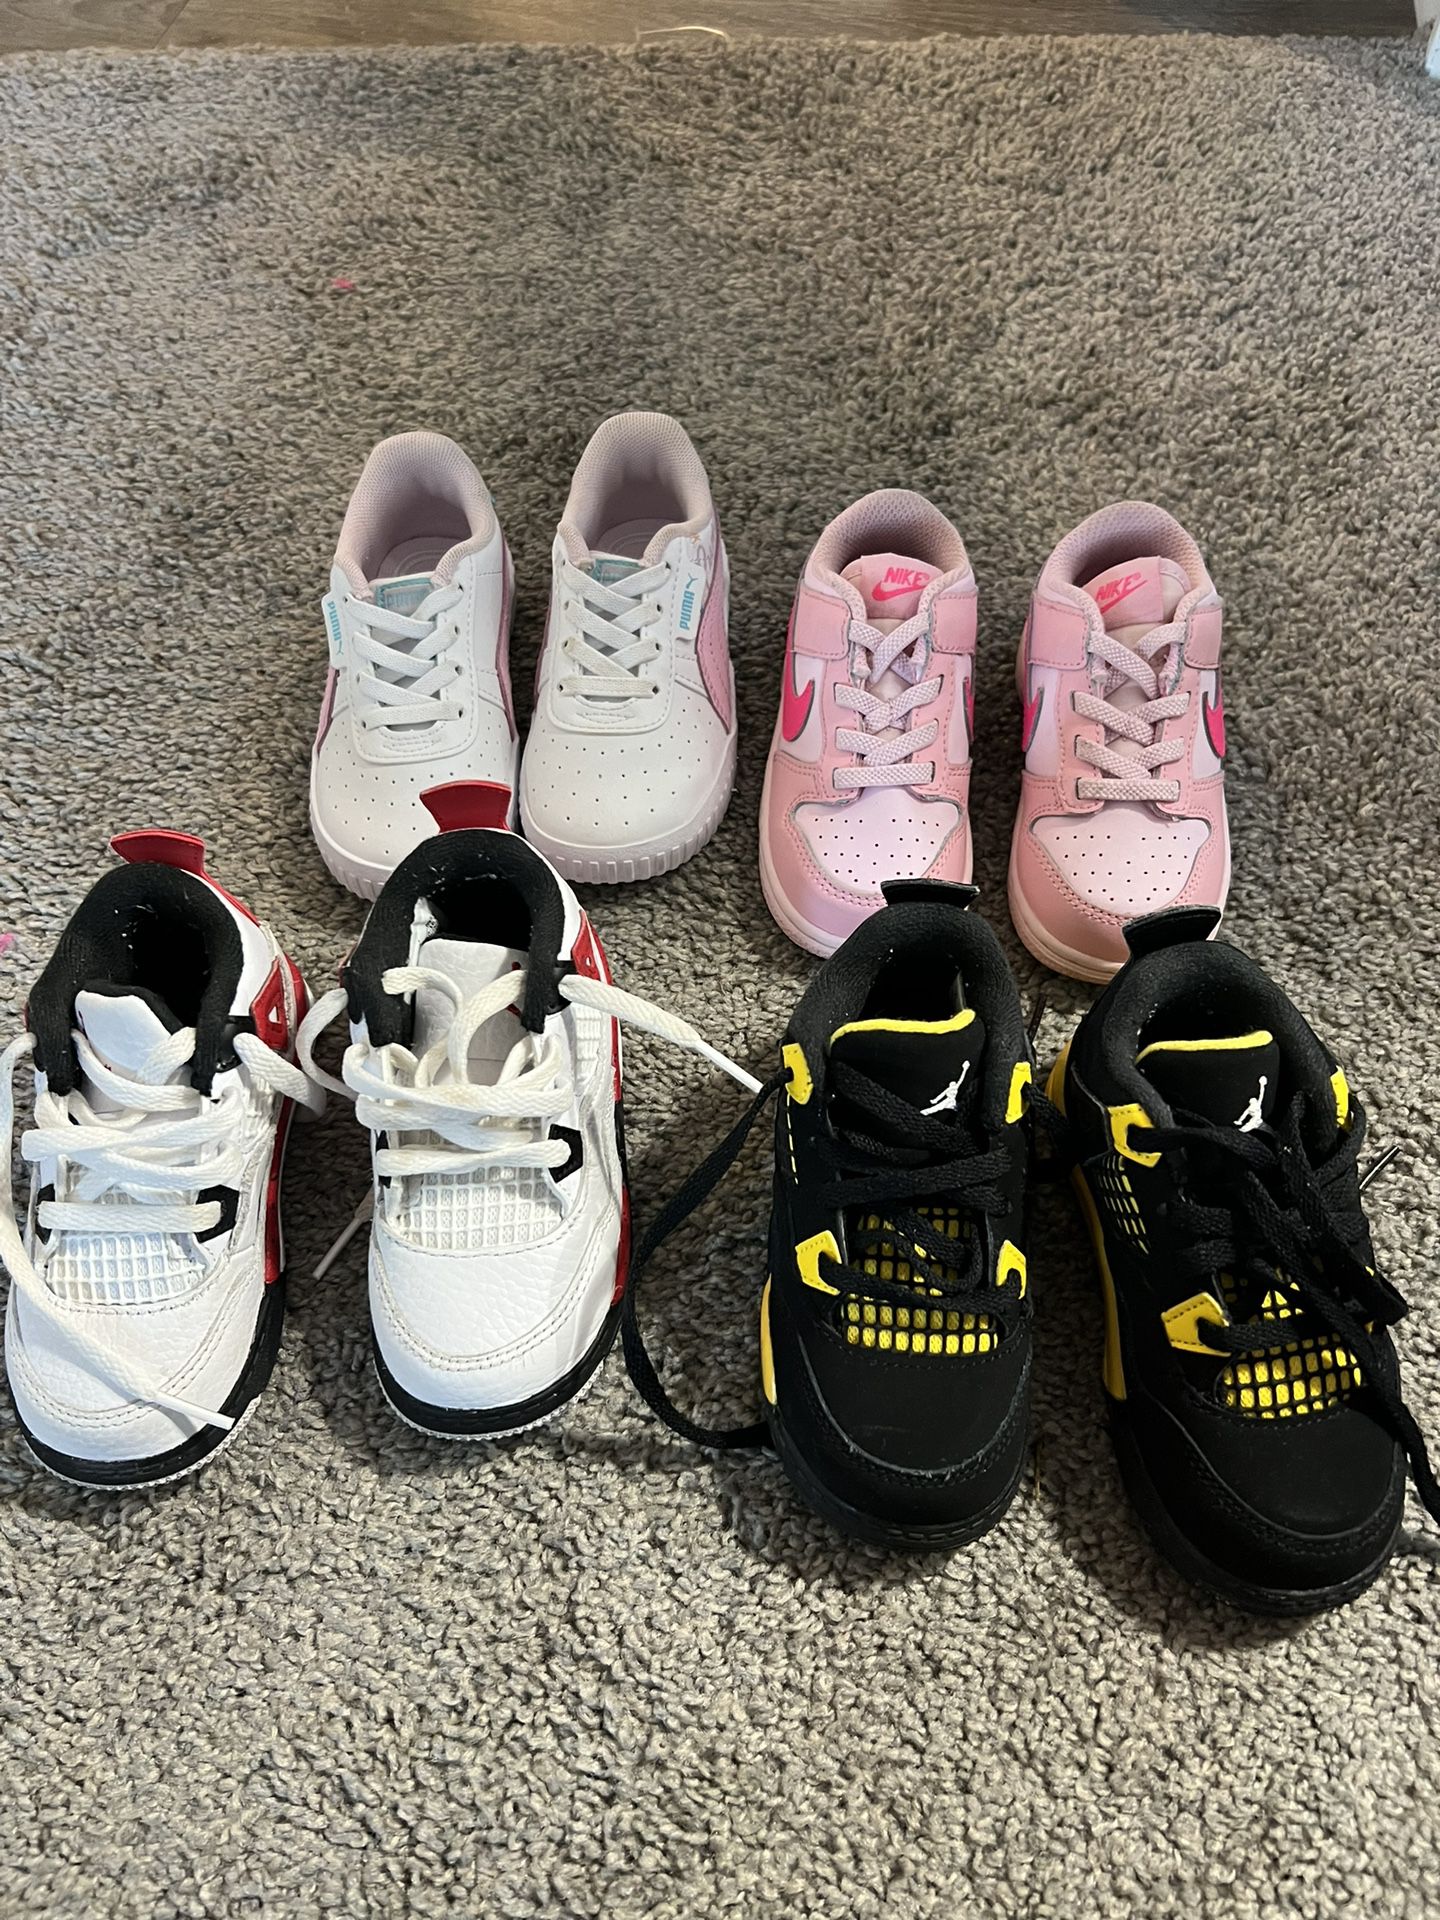 7c toddler shoes